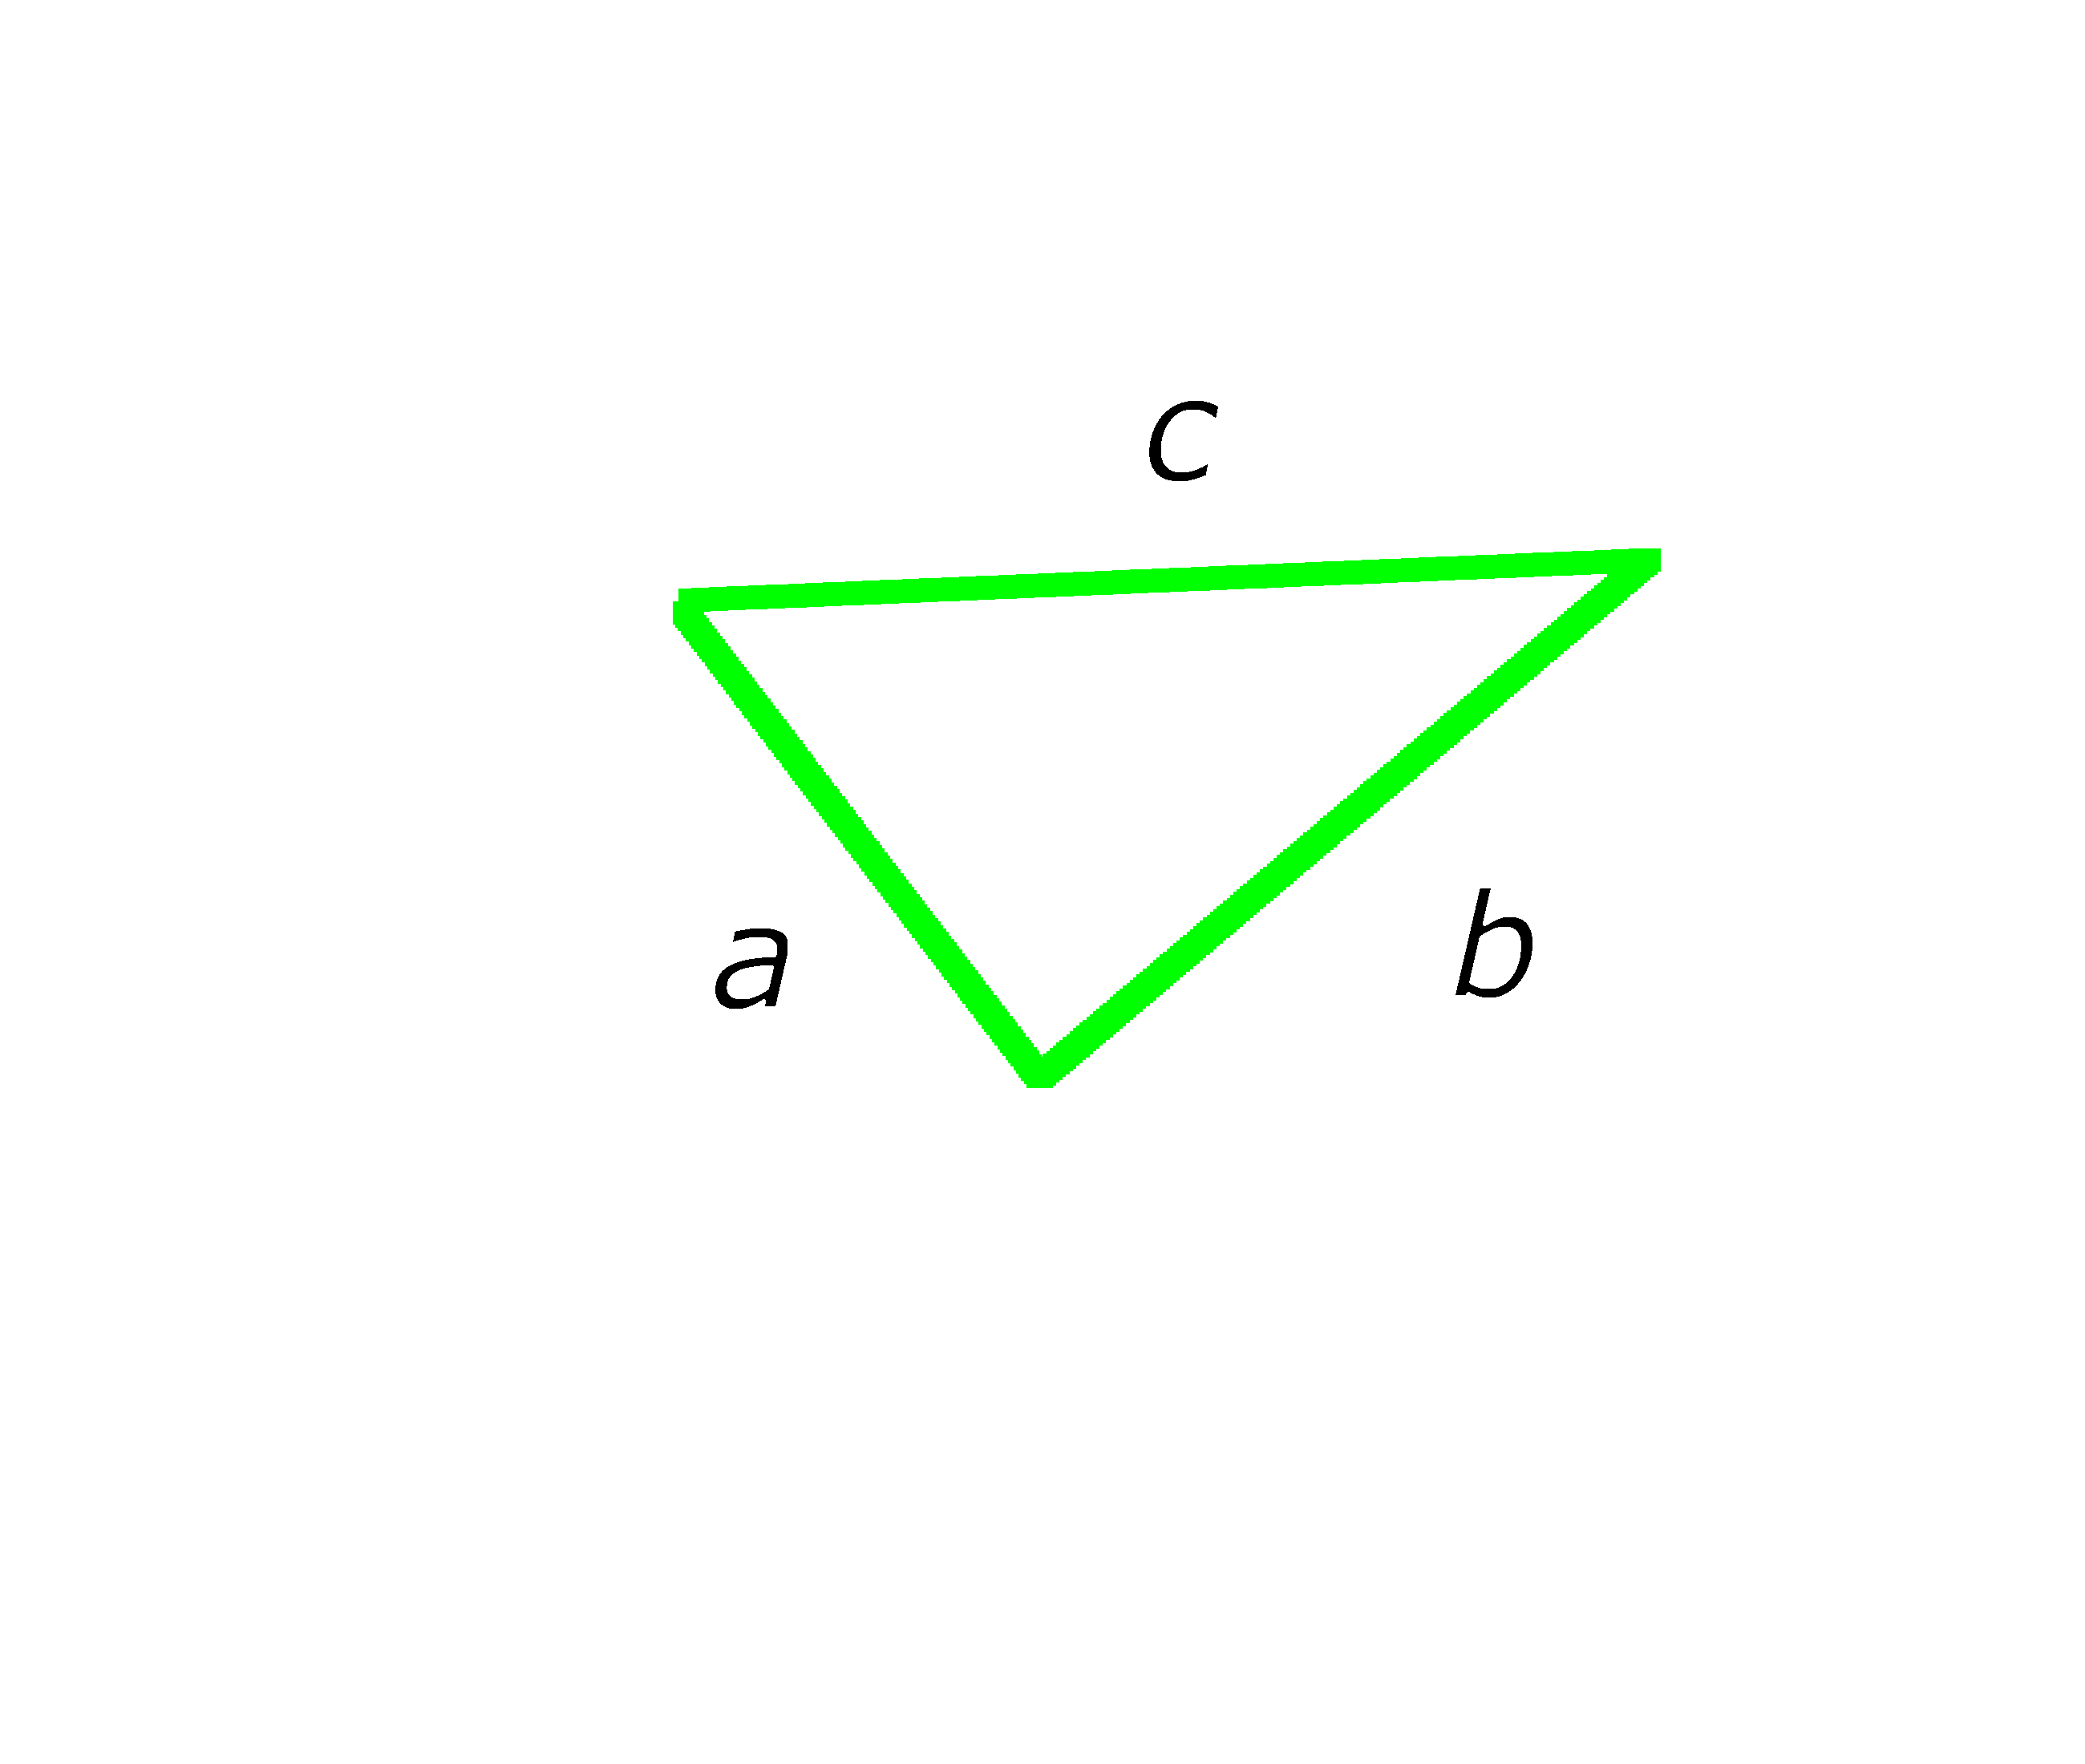 drawing of a triangle abc